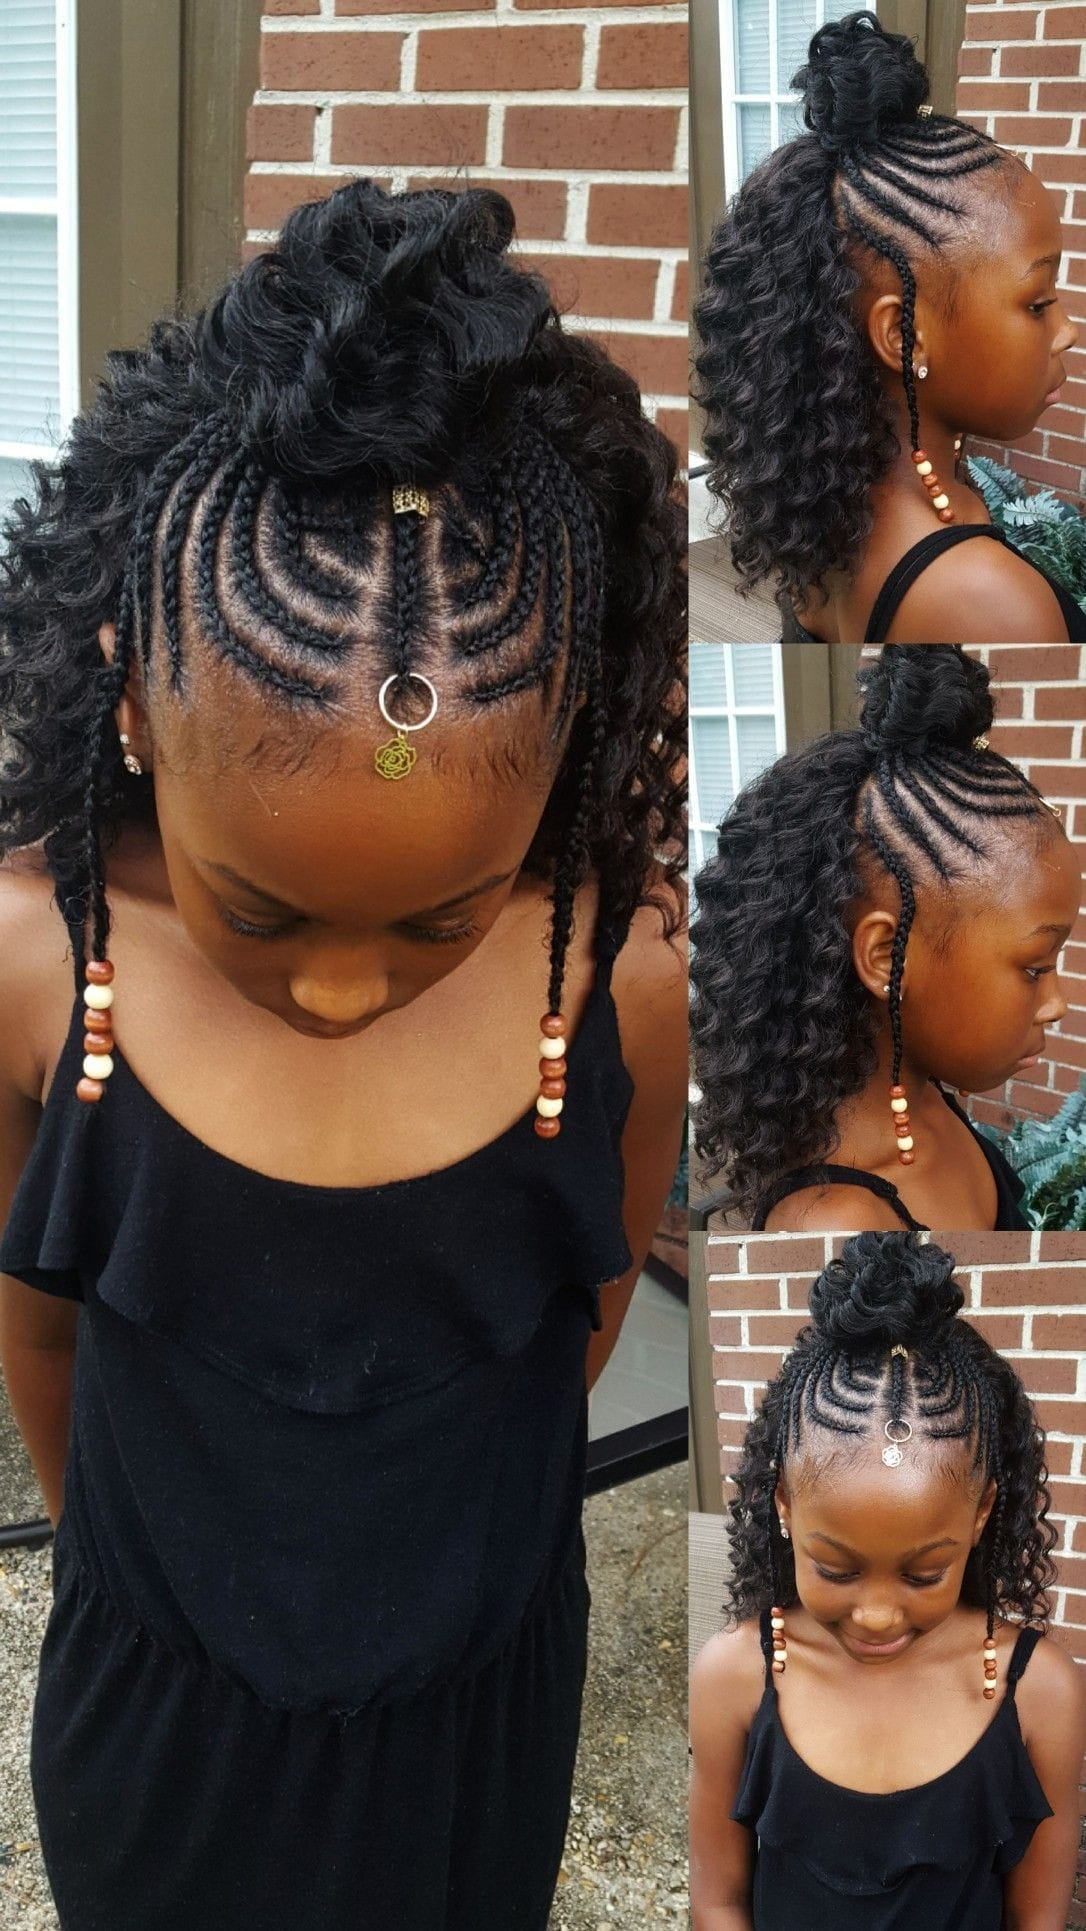 Crochet Braid Pattern For Ponytail 25 Beautiful African Braids For Kids Yengh